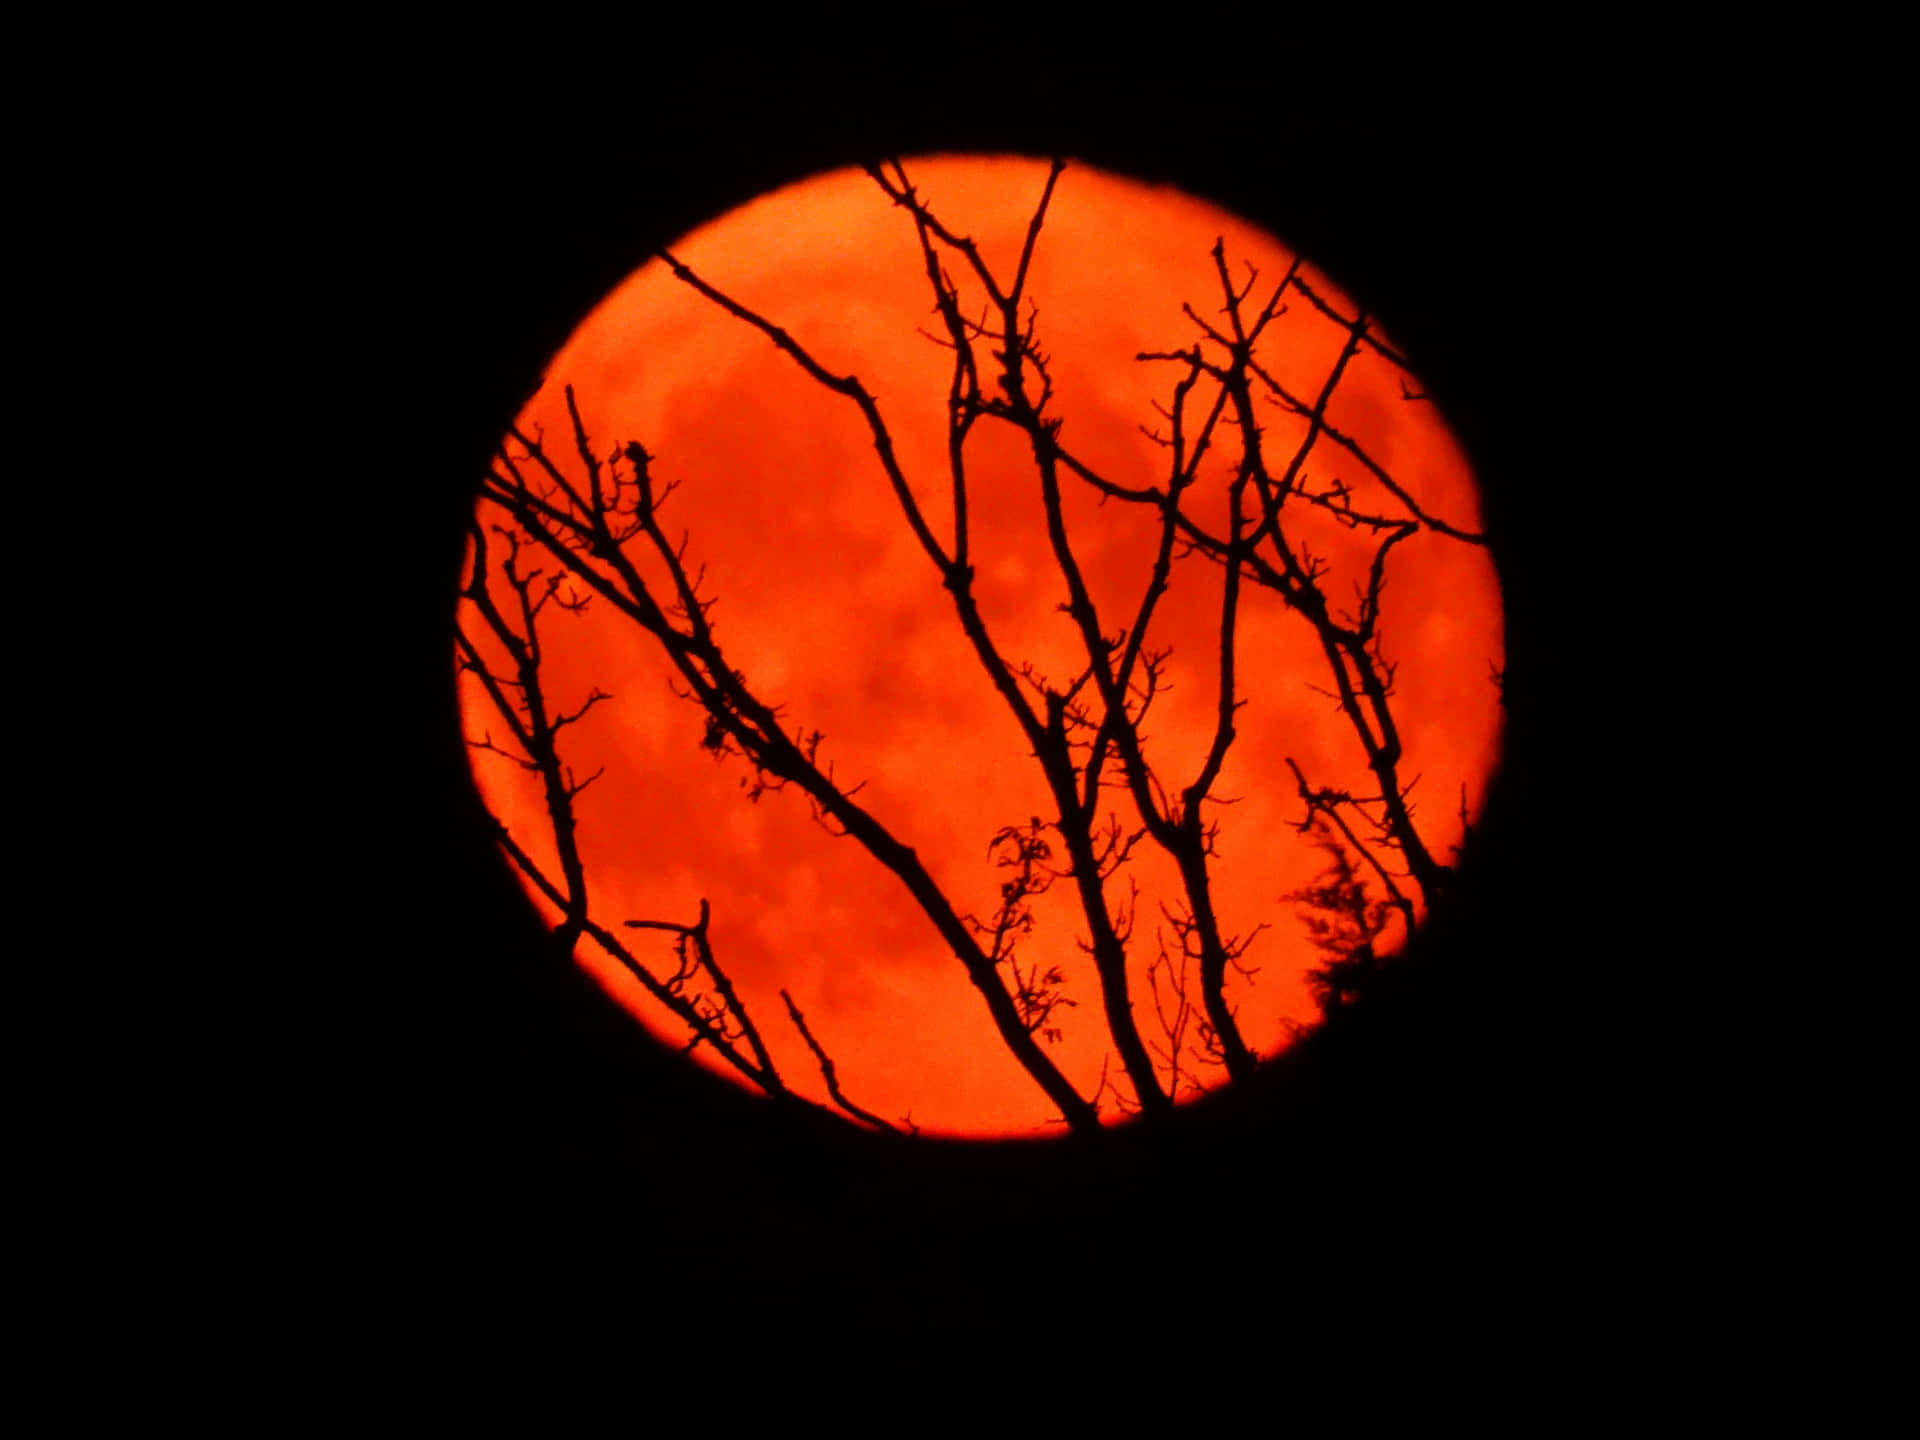 Red Moon Through Bare Branches Wallpaper